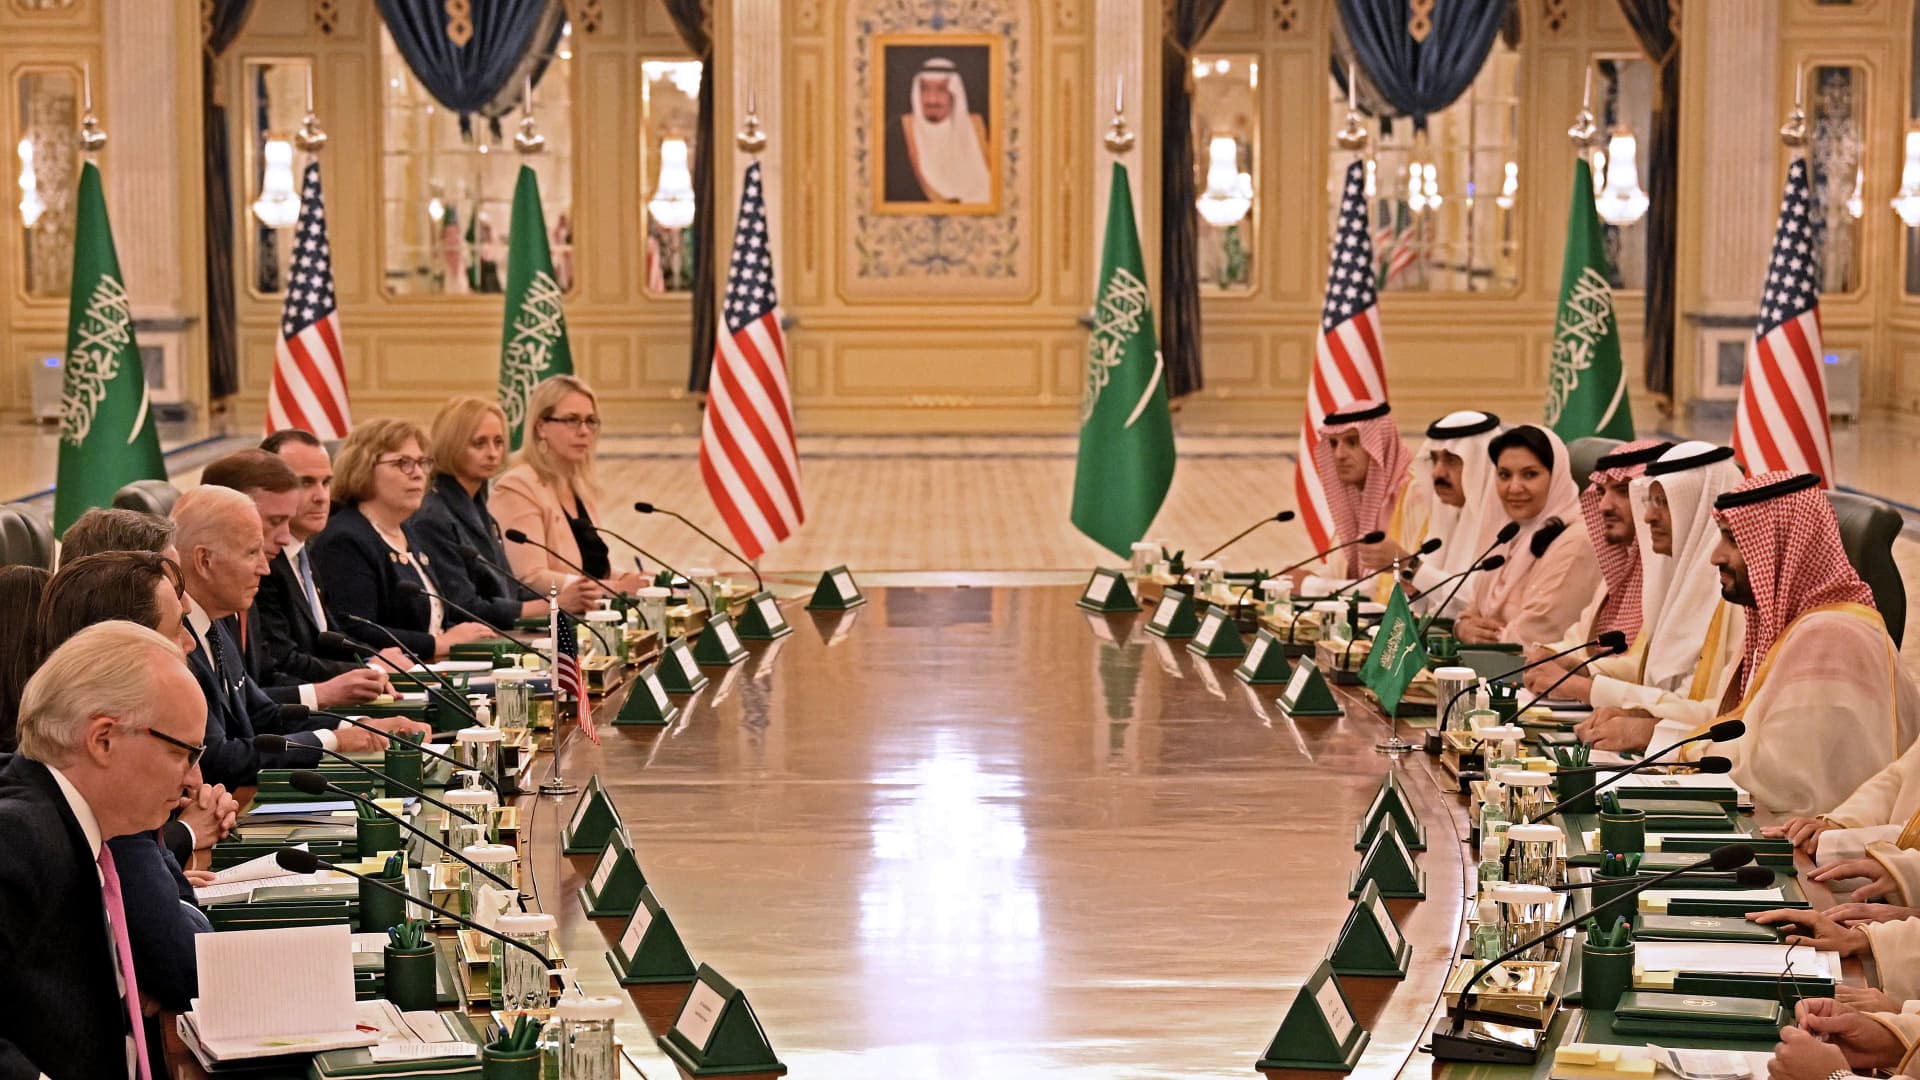 Saudi Arabias Crown Prince Mohammed bin Salman (R) takes part in a working session with the US President Joe Biden (3-L) at the Al Salam Royal Palace in the Saudi coastal city of Jeddah, on July 15, 2022.